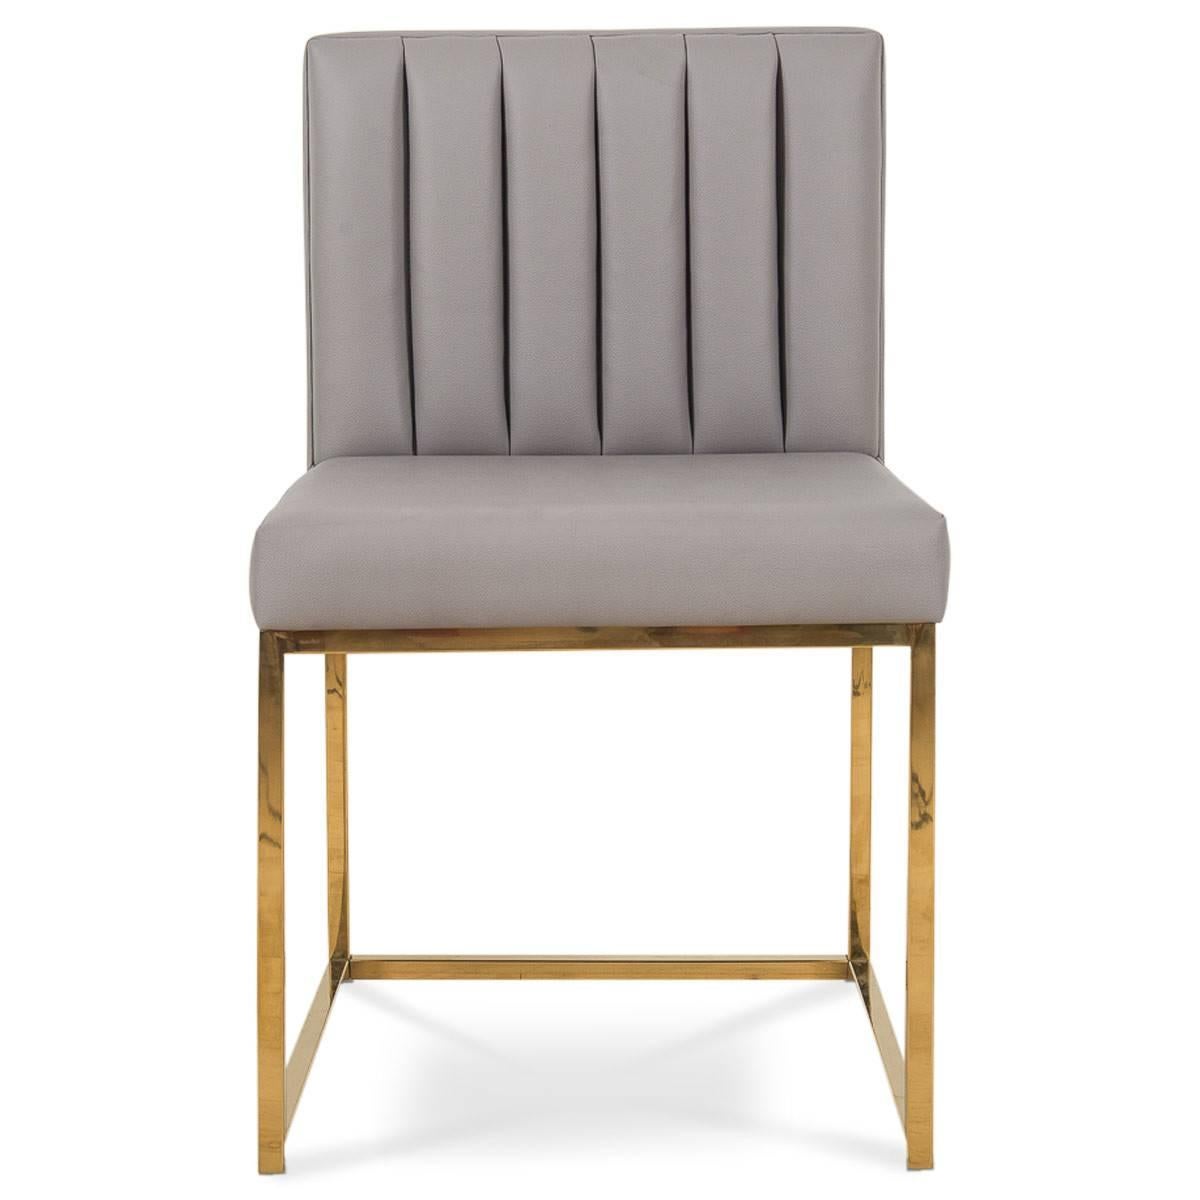 Sleek and stylish, these beautiful dining chairs will add some class to your dining room. Now offered in a graphite faux leather skilfully tufted to add simple elegance to your dining area.

Dimensions:

19